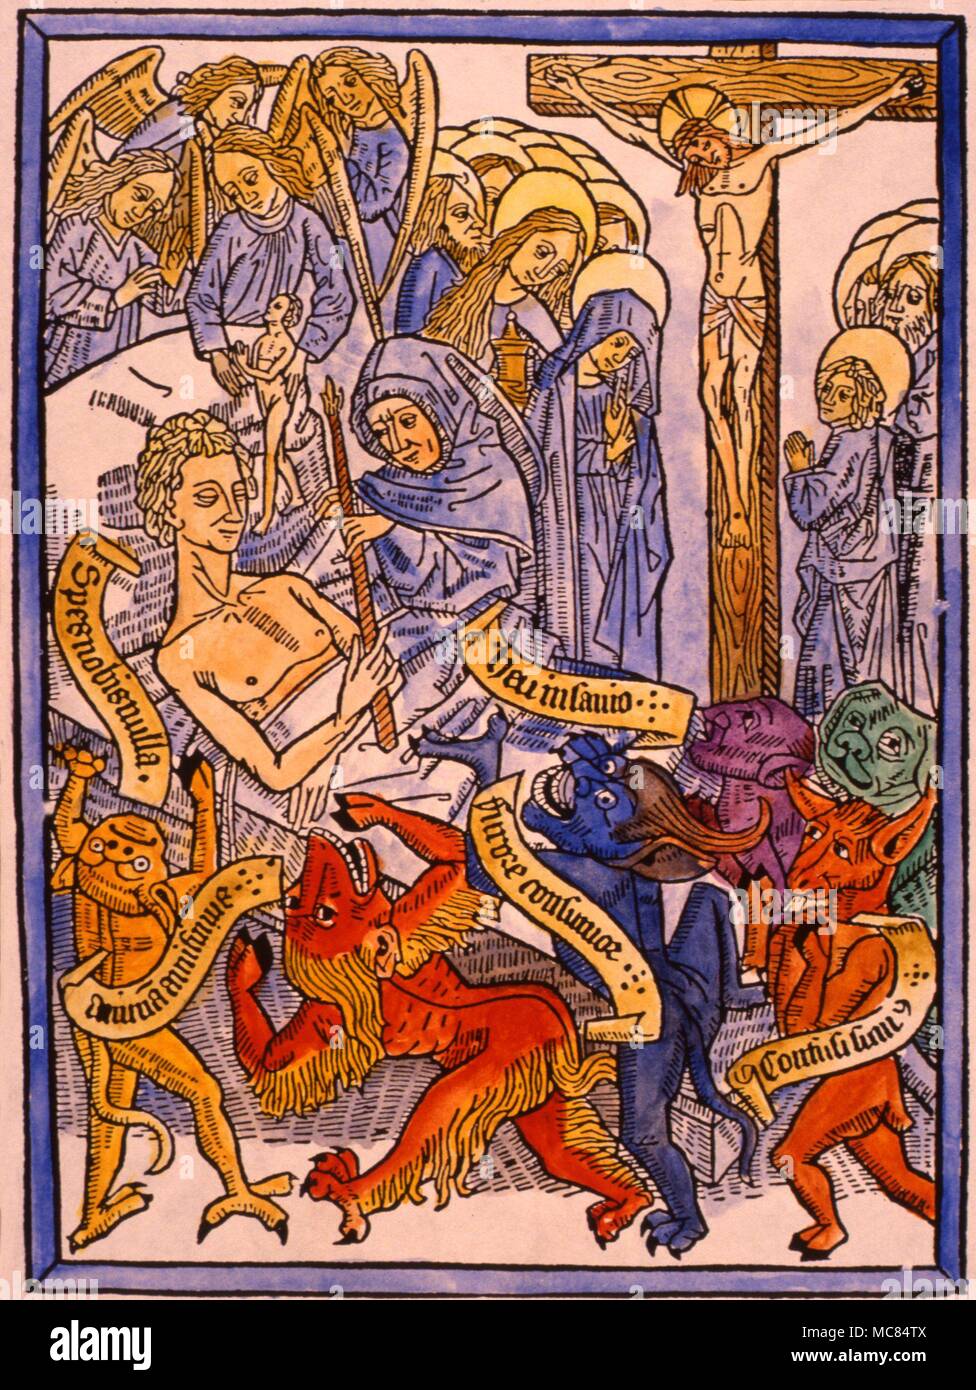 German woodblock 'Ars Moriendi', of circa 1470 depicting a deathbed scene with demons and angels struggling for the soul of the sying man: the angel appears to have won the struggle. Stock Photo